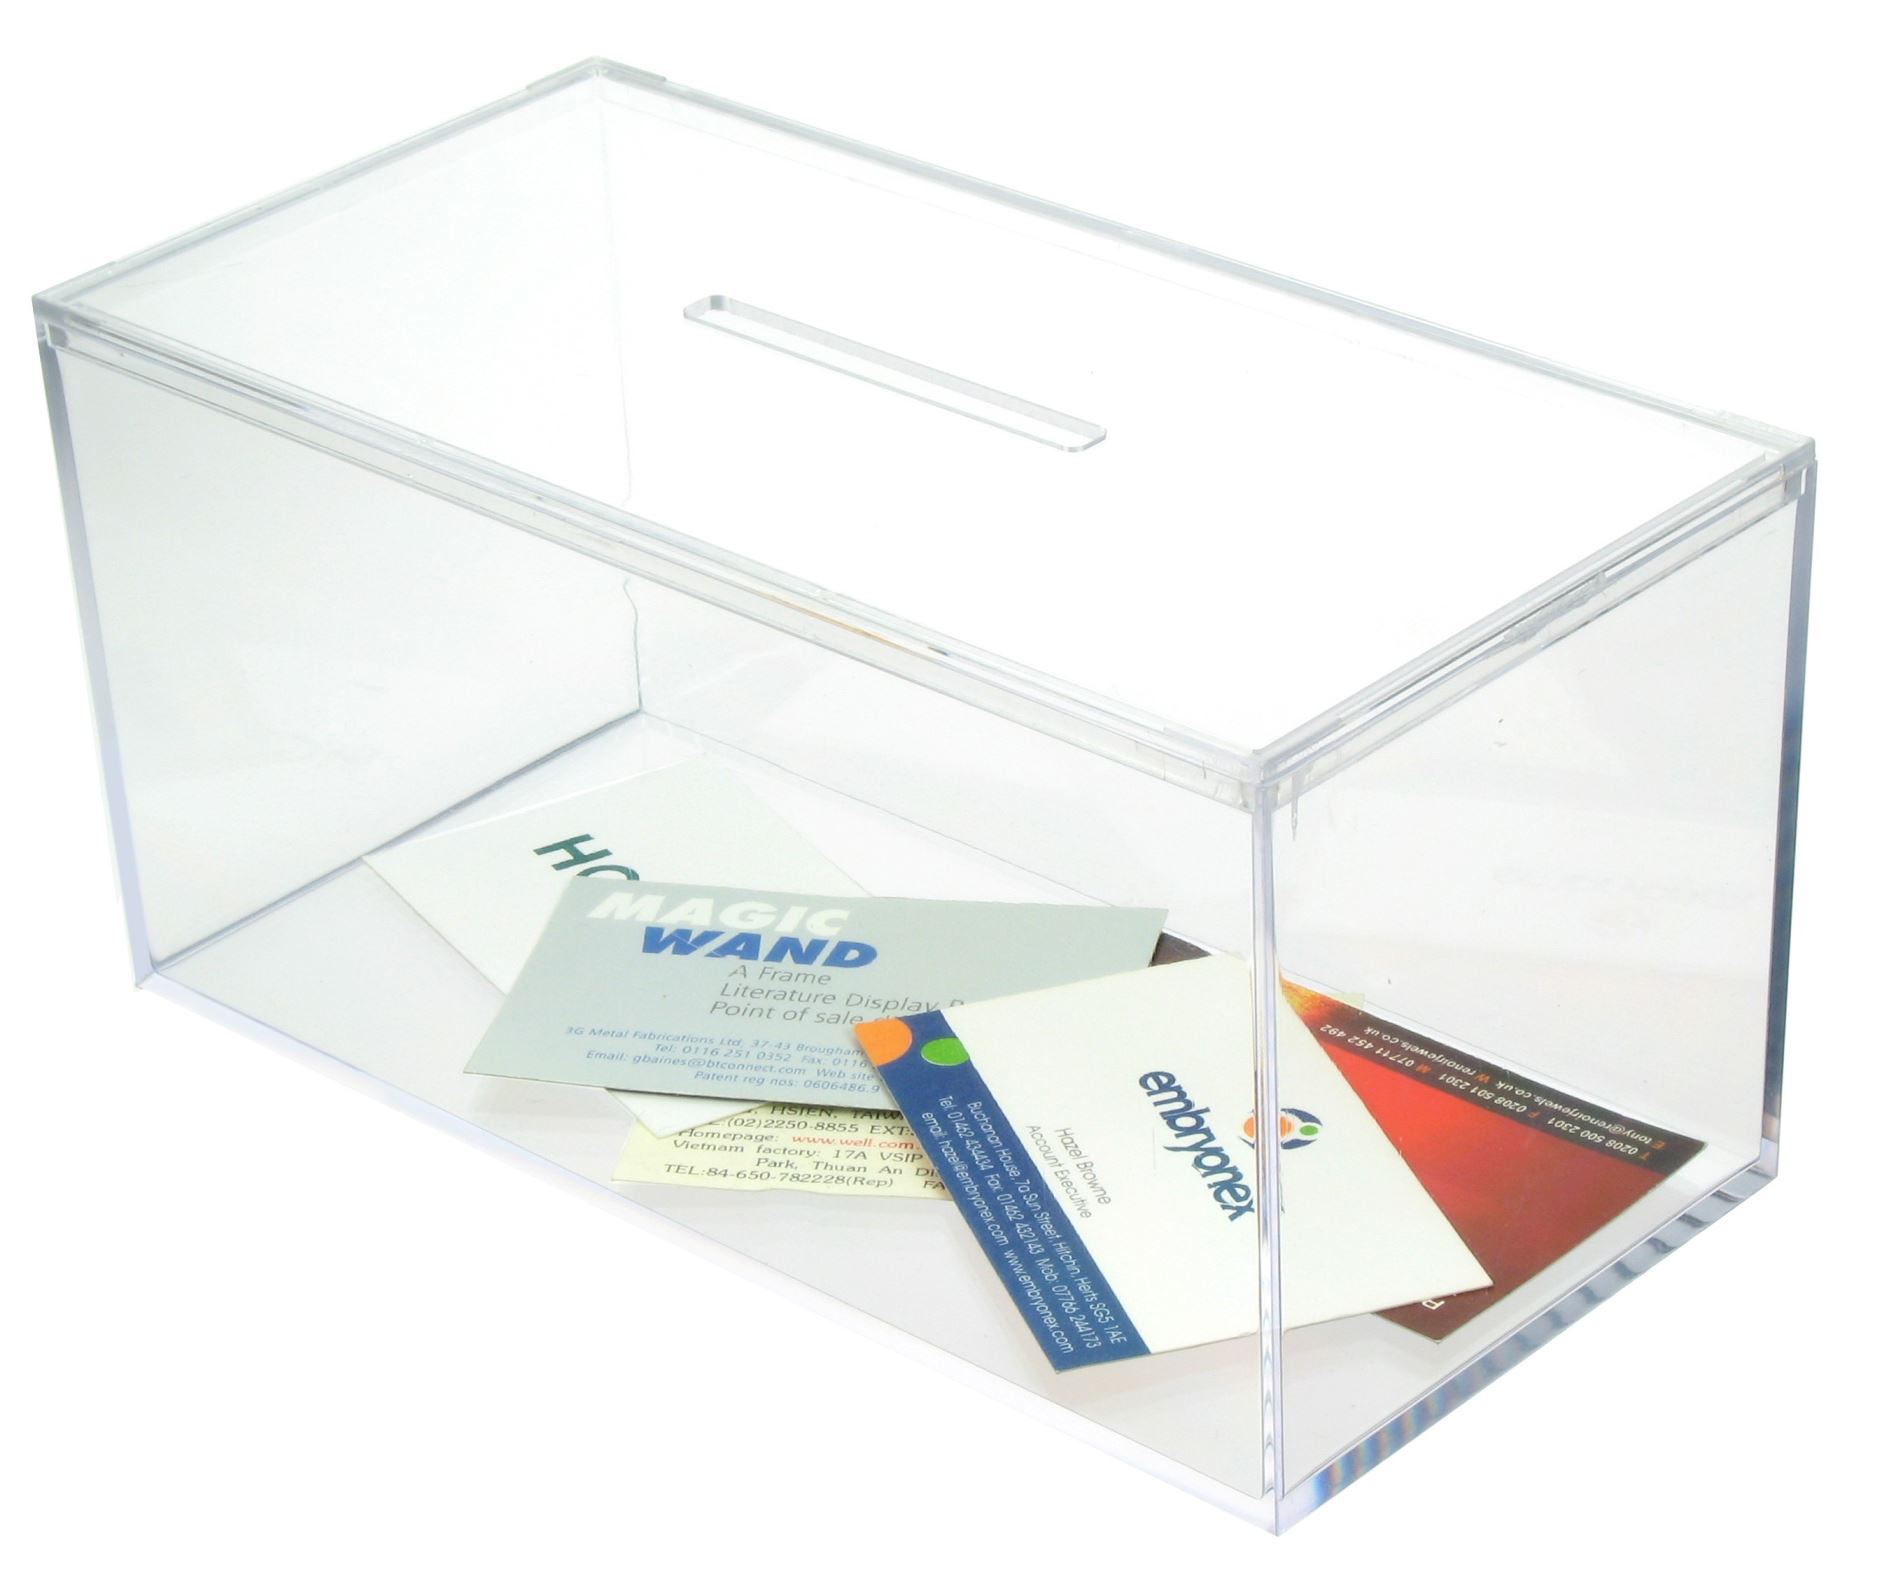 Business Card Collection Box